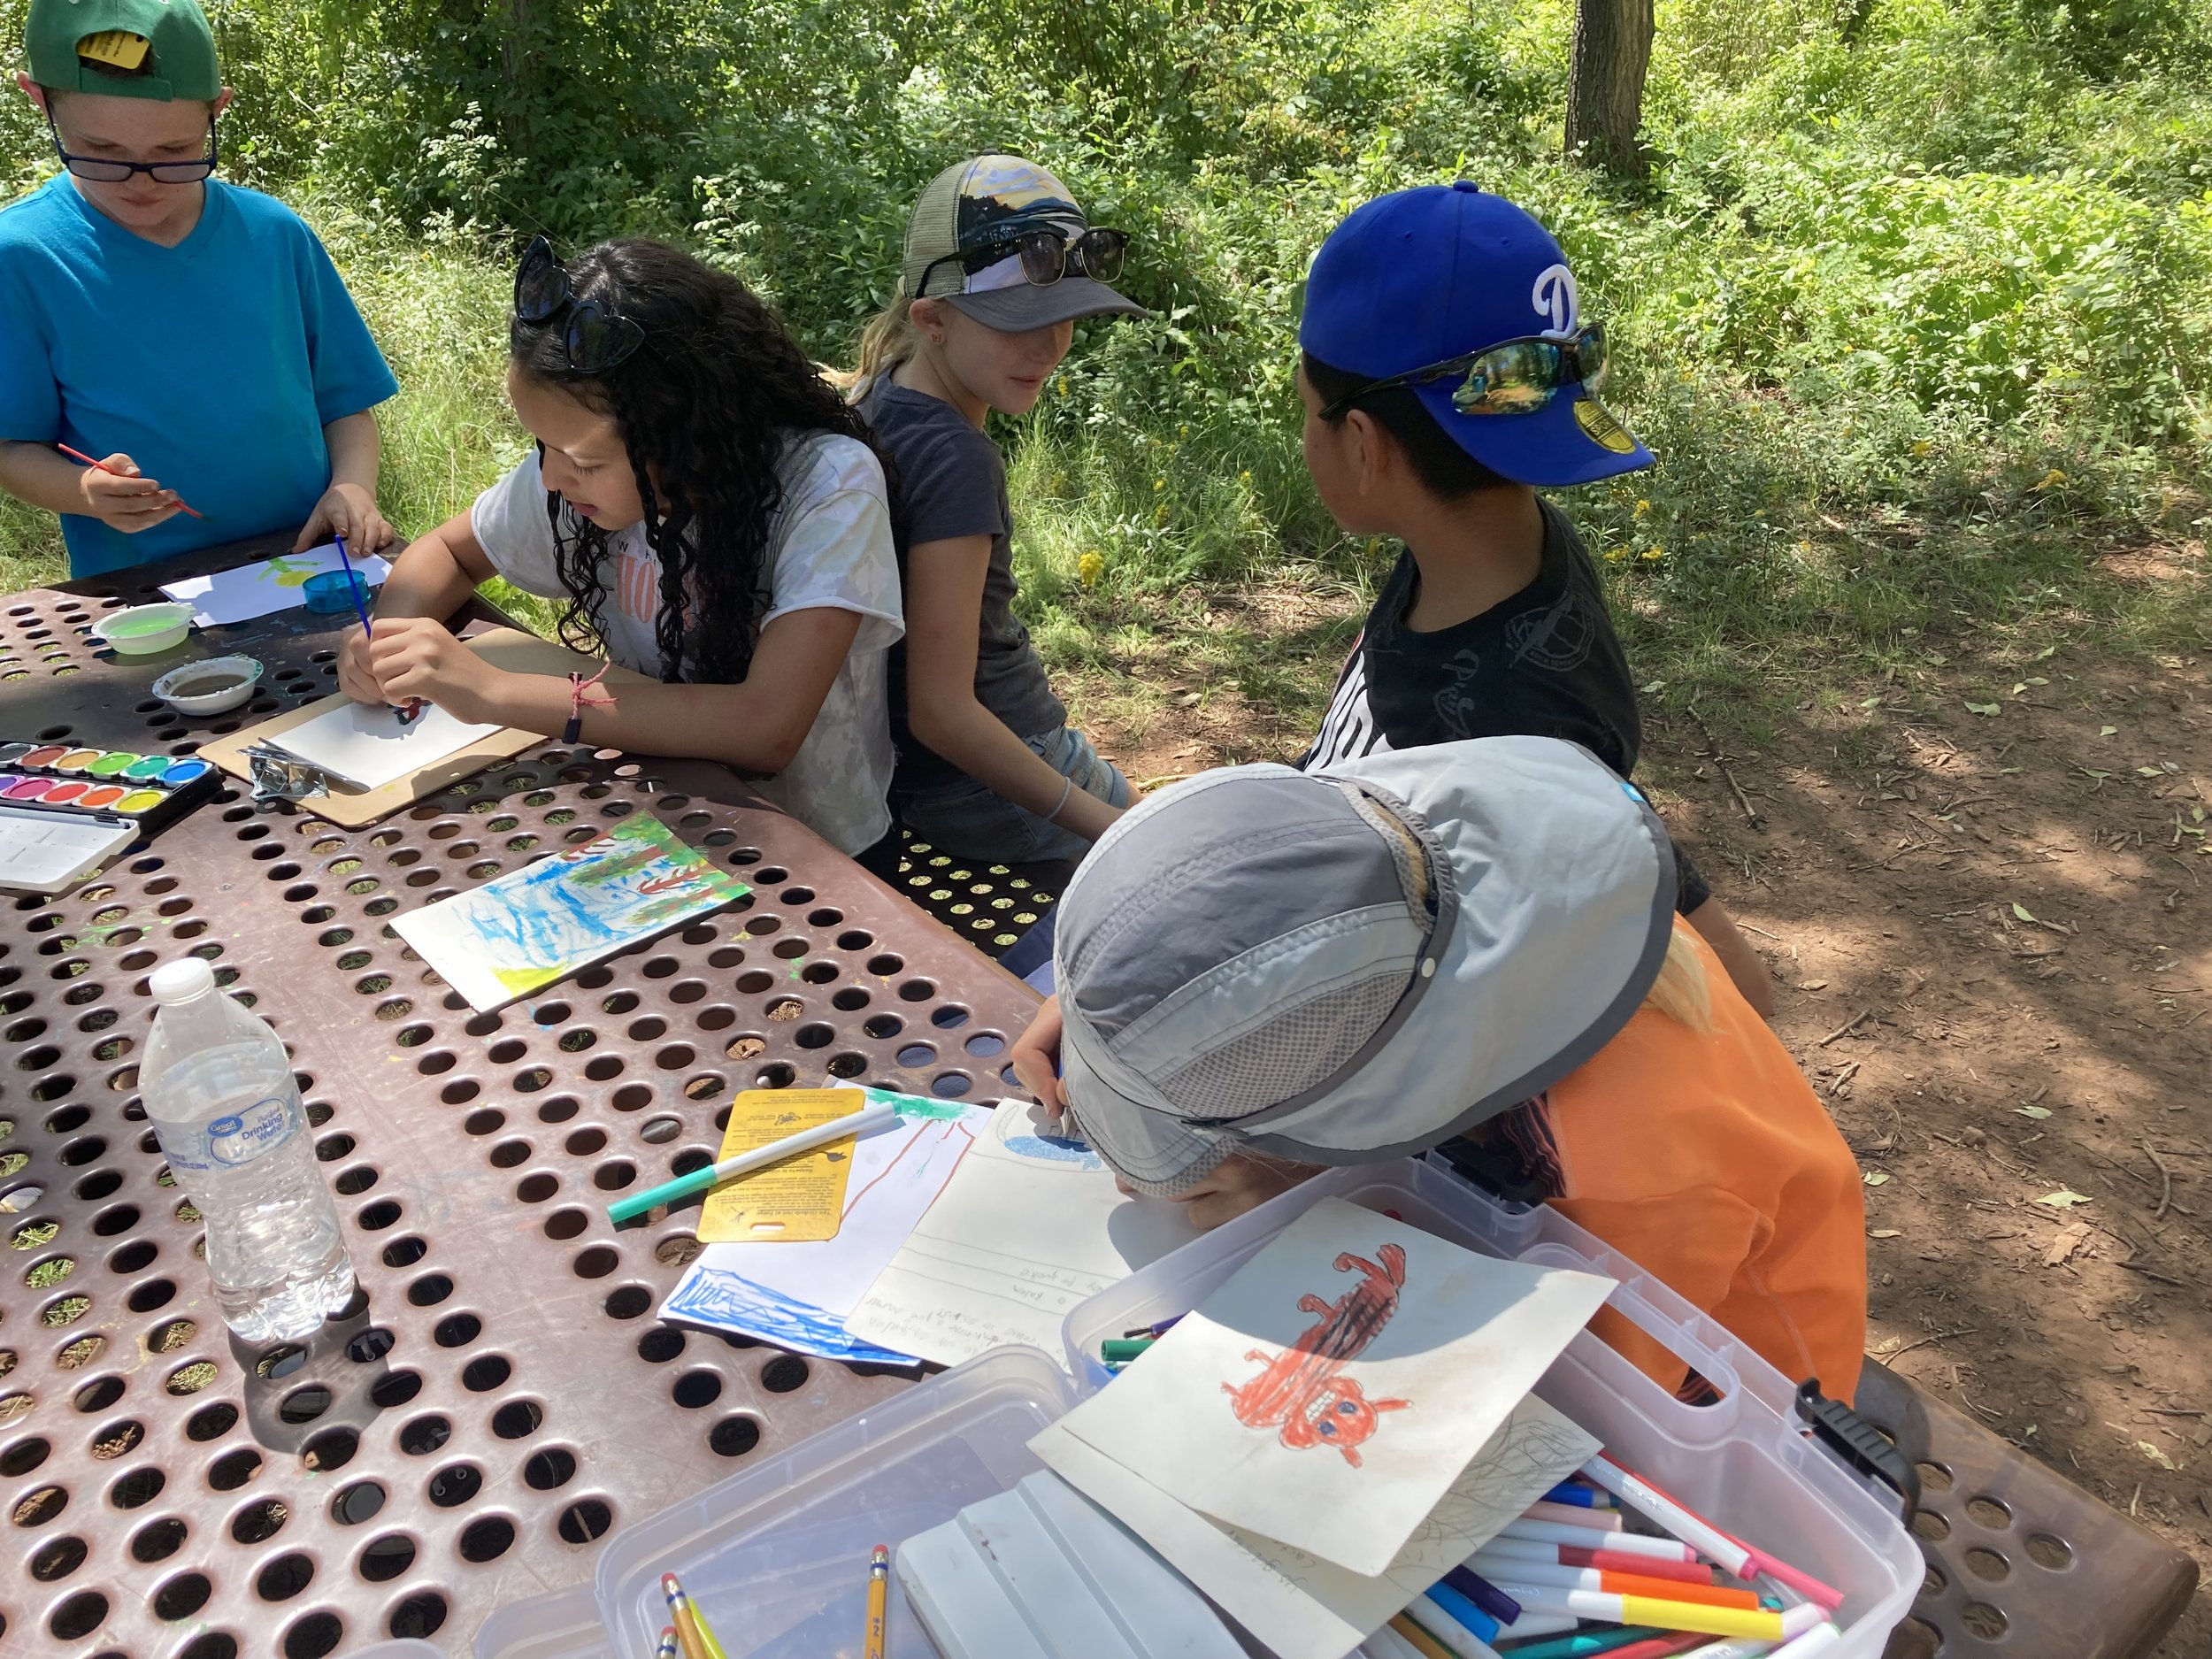  Time to create art! Each student has their own learning style and interests. Having the space to learn and reflect about the landscape through art was interactive and engaging for the kids.  